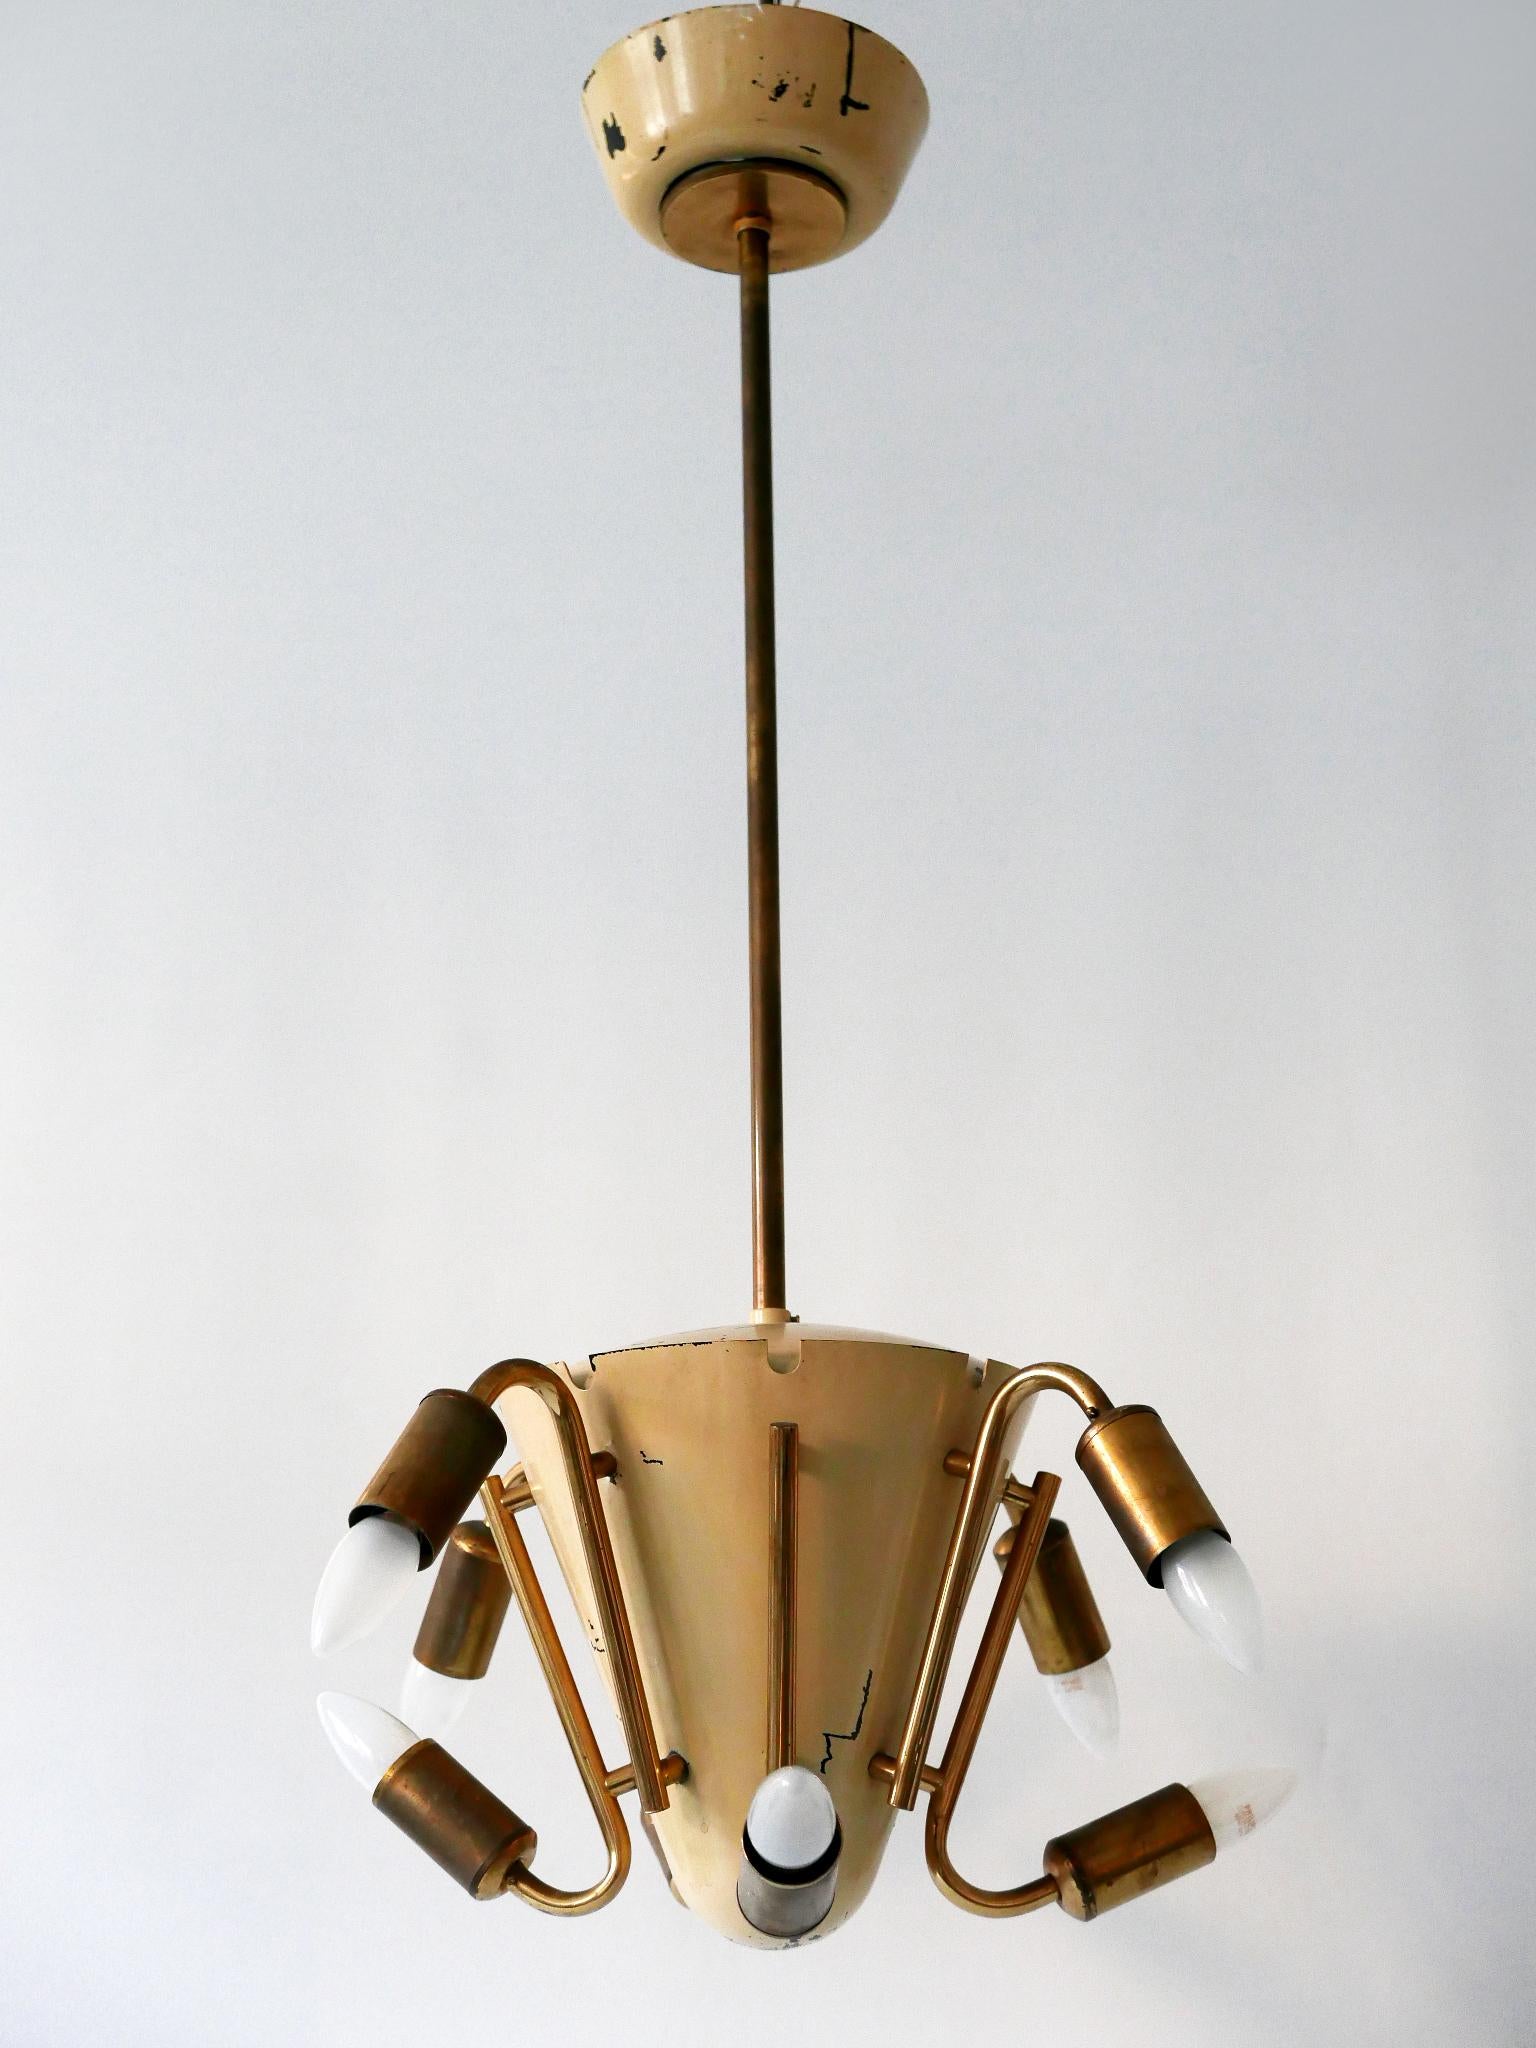 Mid-20th Century Amazing Mid-Century Modern Eight-Armed Sputnik Chandelier or Pendant Lamp, 1950s For Sale